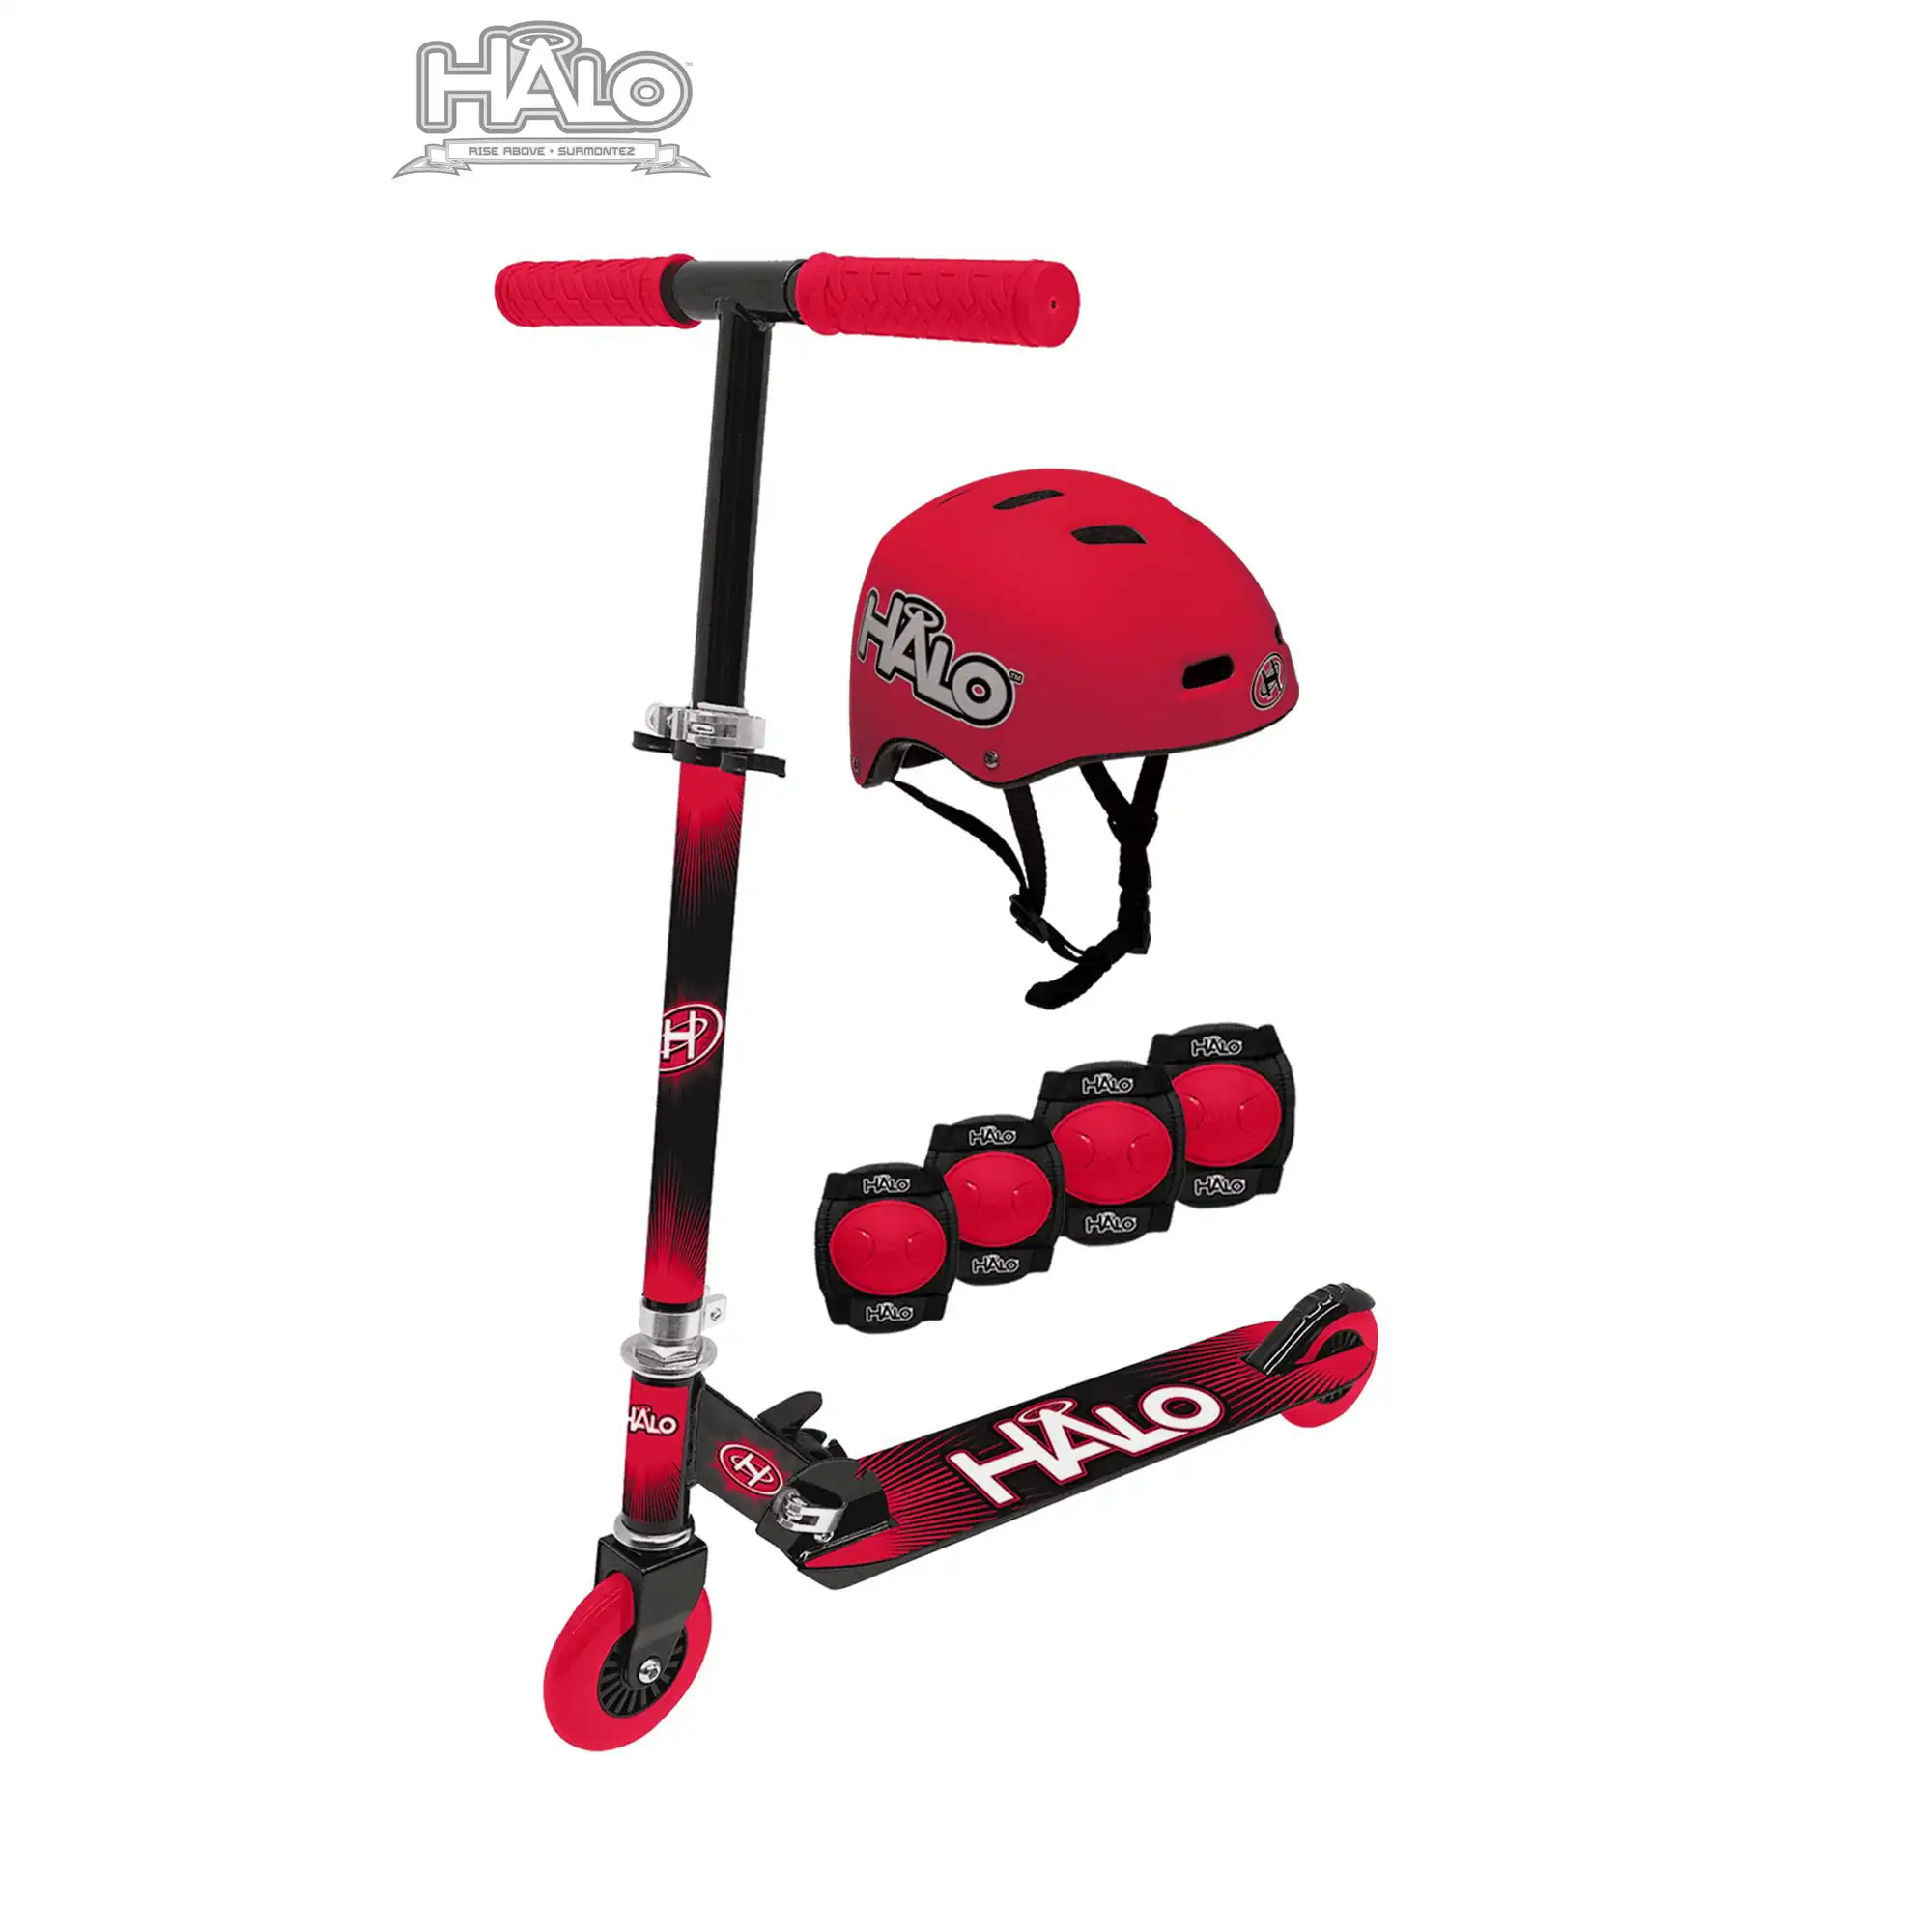 Rise Above 6 piece Scooter Combo - Red - Including 1 Premium Inline Scooter, 1 Size Adjustable Multi-Sport Helmet, 2 Elbow Pads,